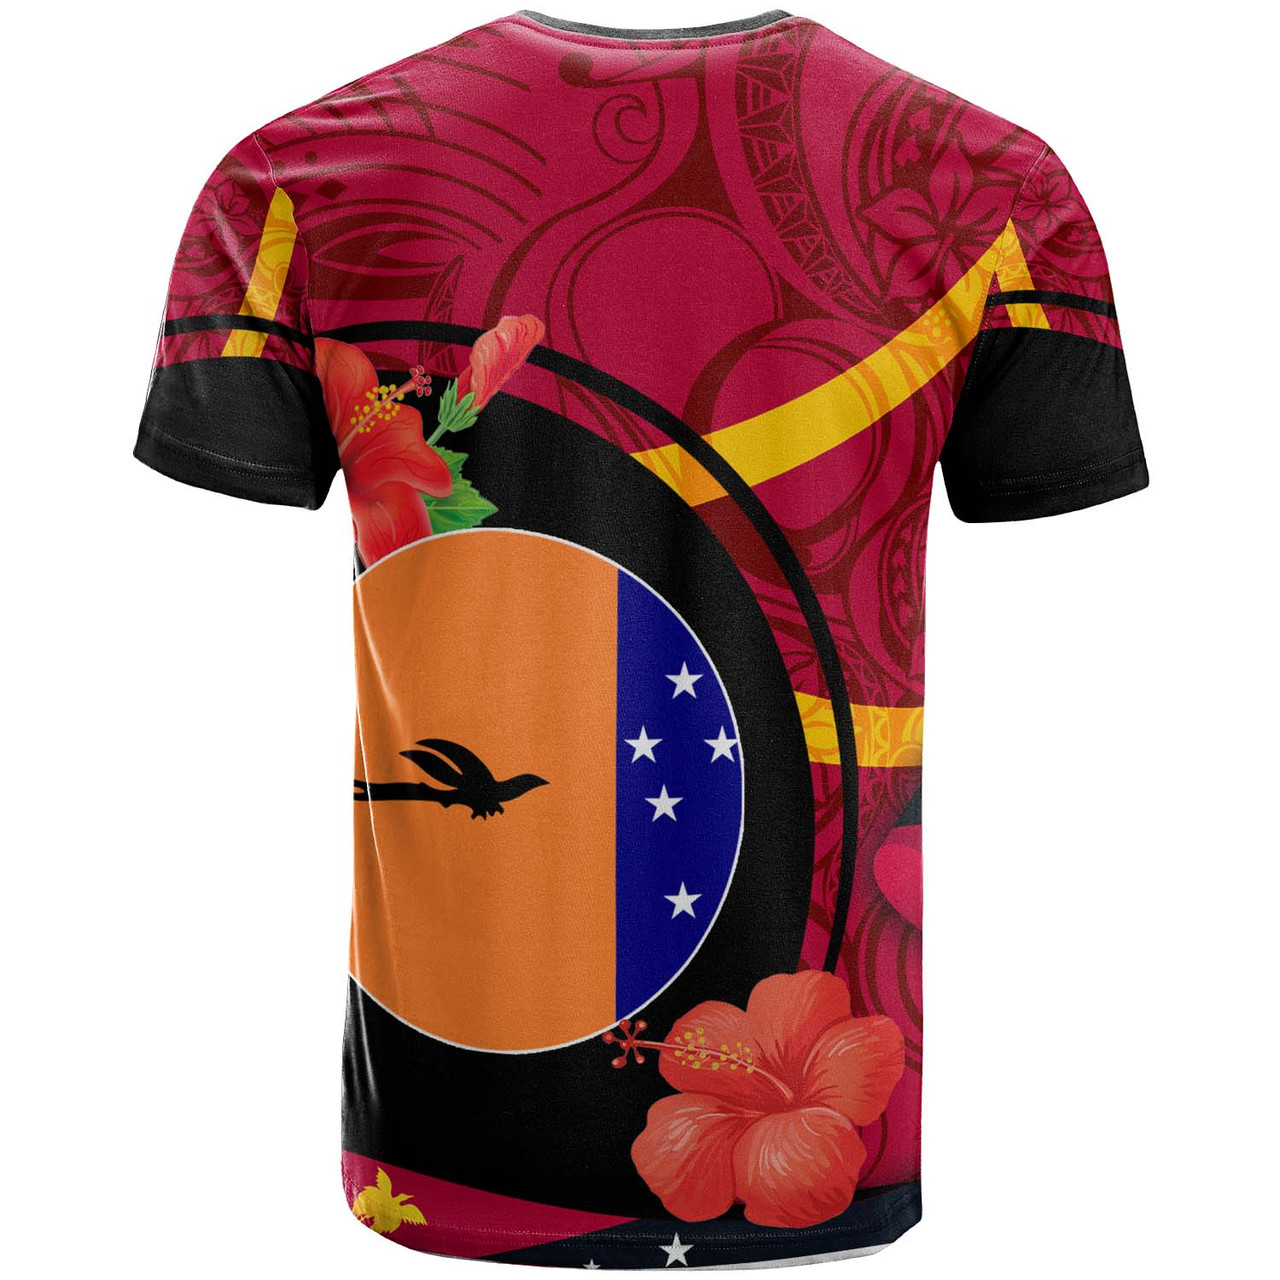 Papua New Guinea T-Shirt -New Ireland Flag of PNG with Hibicus and Polynesian Culture T-Shirt